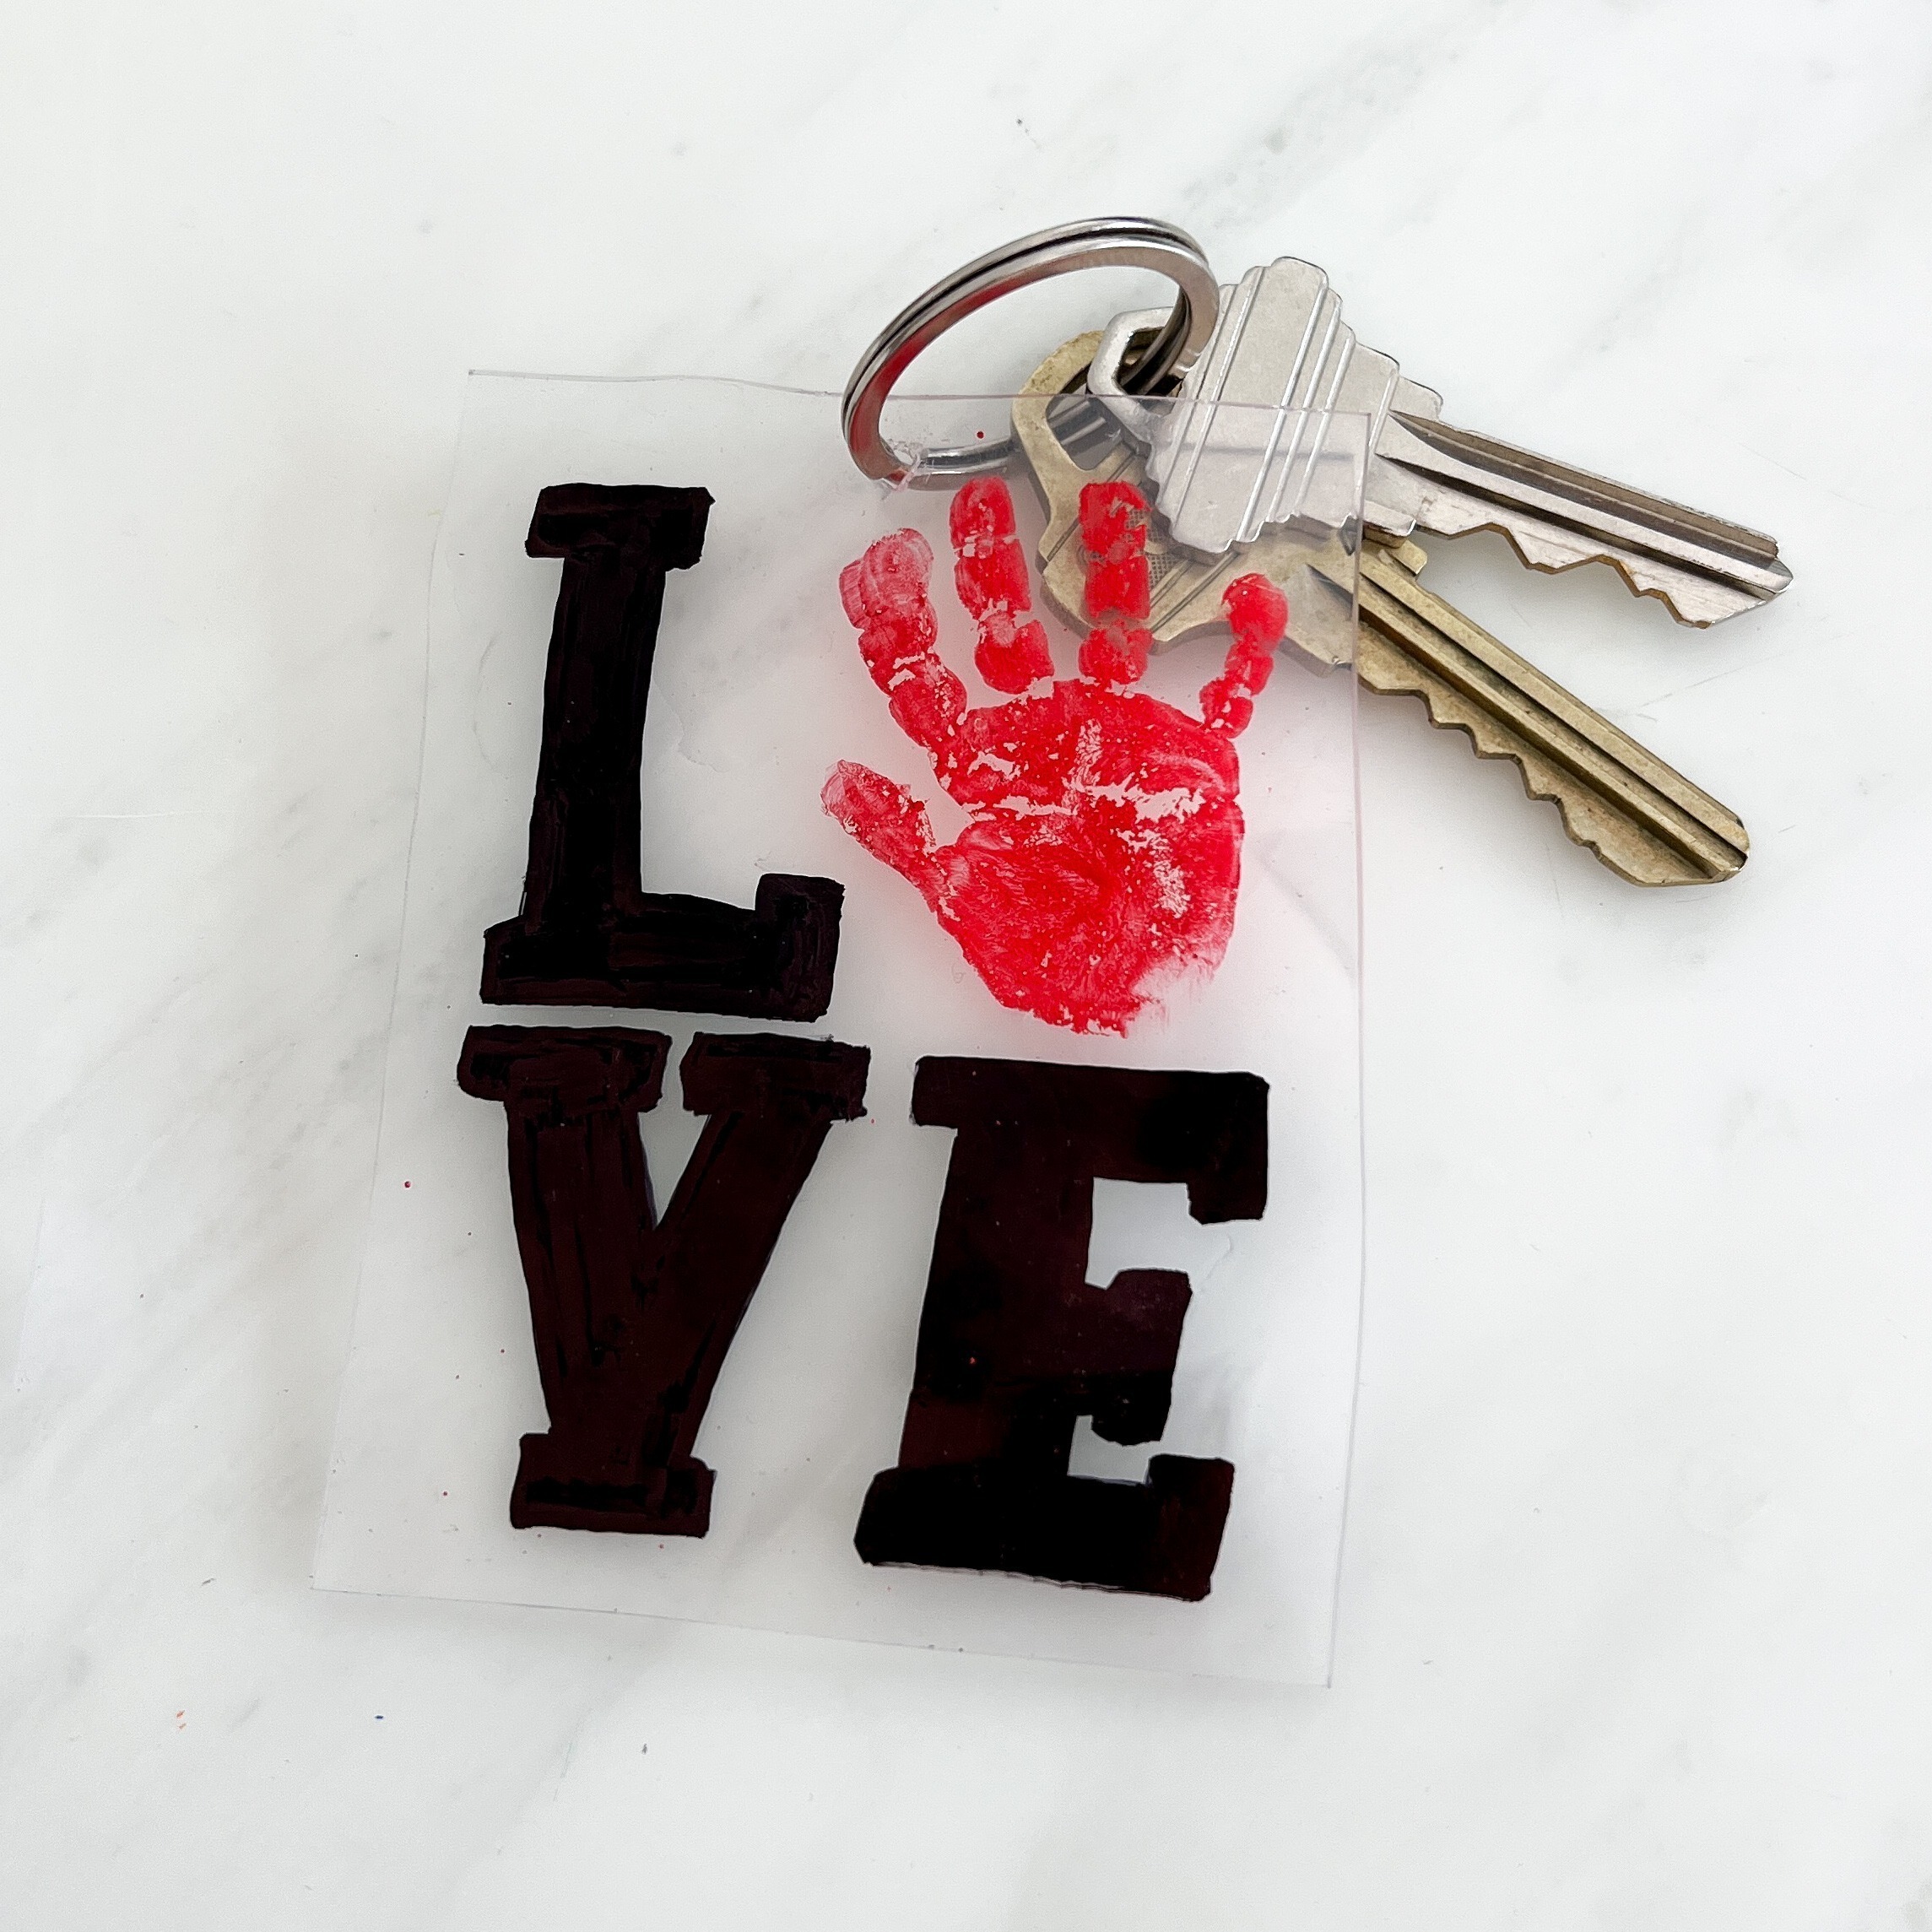 handprint craft for valentine's day using shrinky dink paper to make a keychain